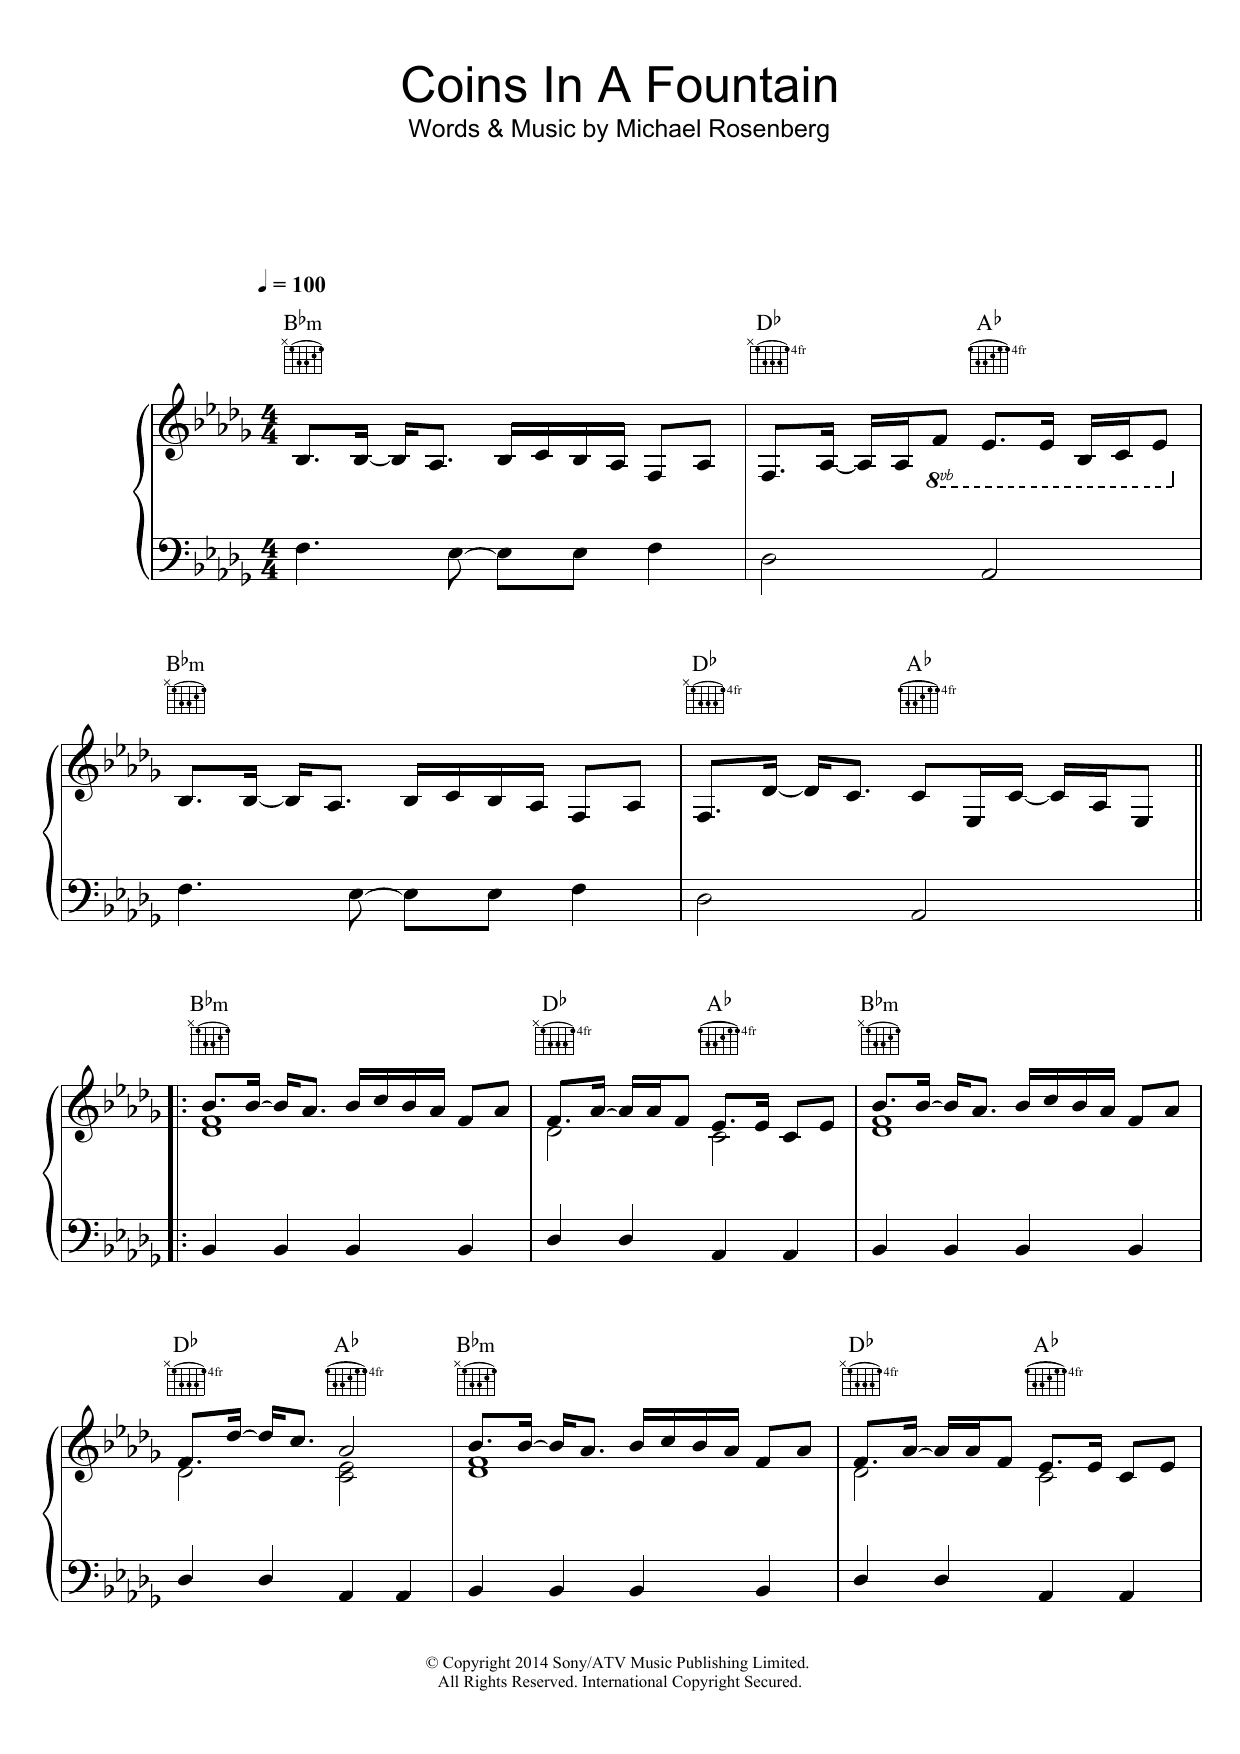 Download Passenger Coins In A Fountain Sheet Music